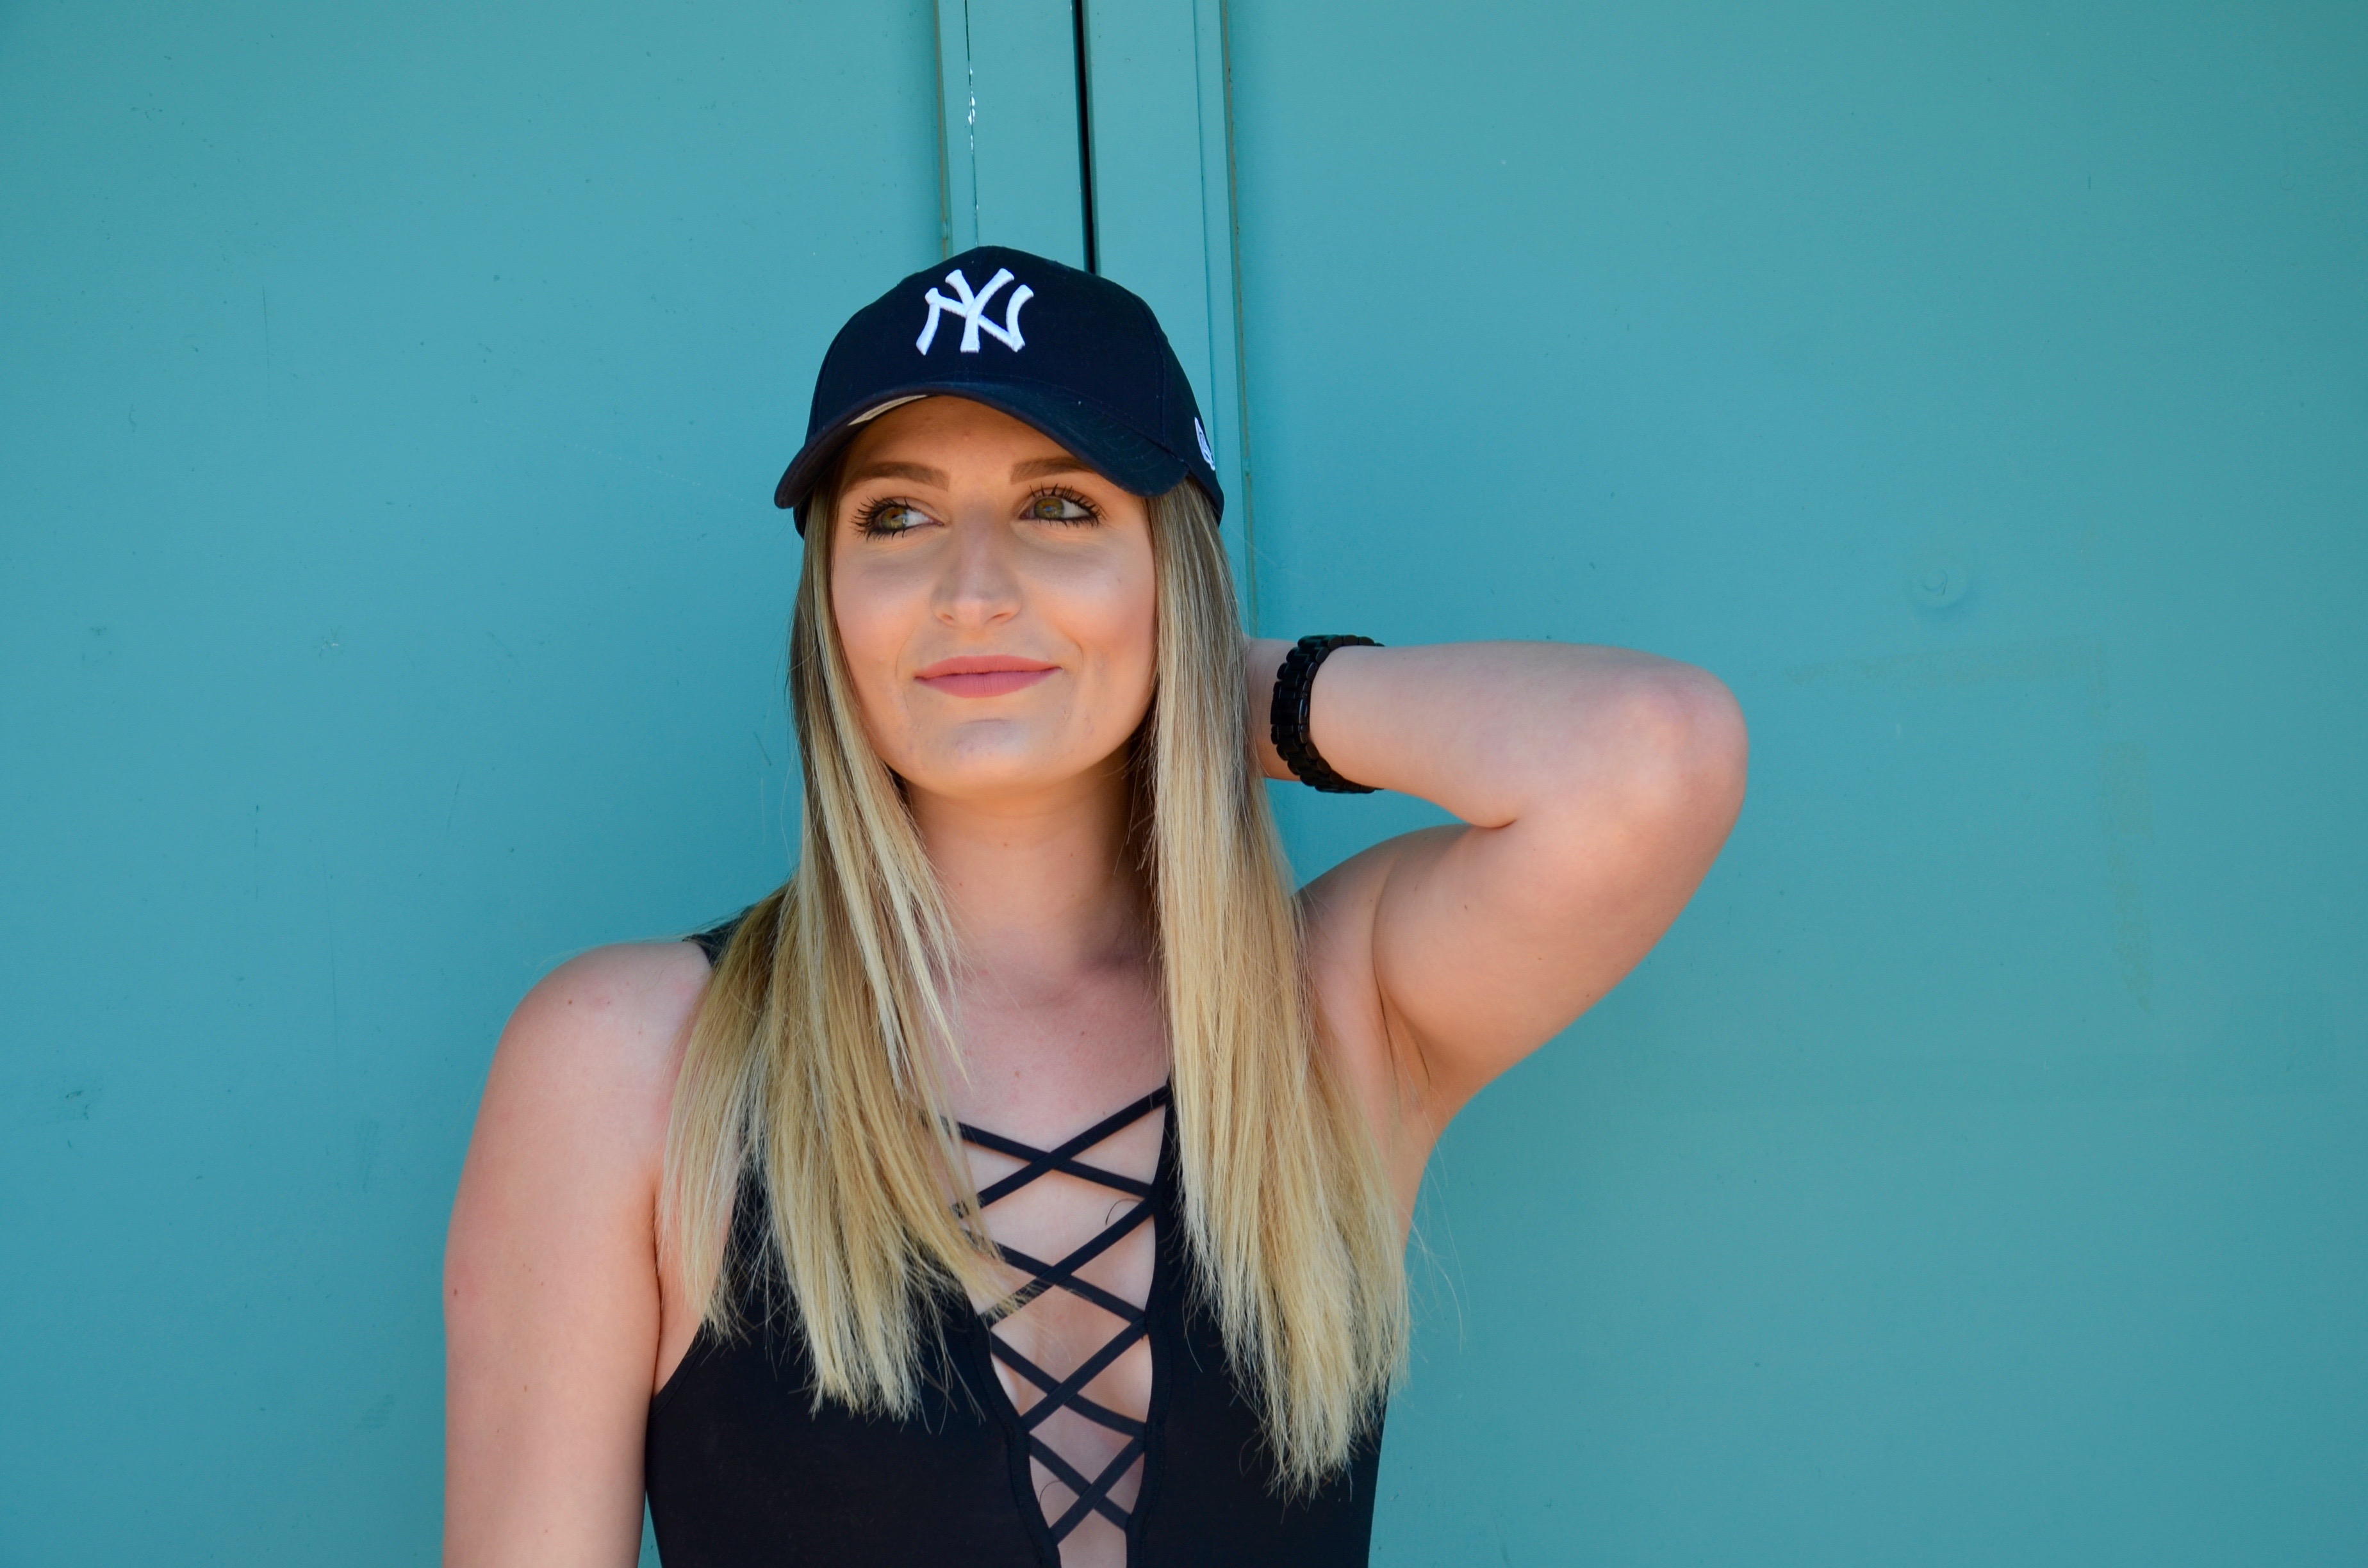 ny yankees baseball cap - Travel Outfit Of The Day by popular Texas style blogger Audrey Madison Stowe